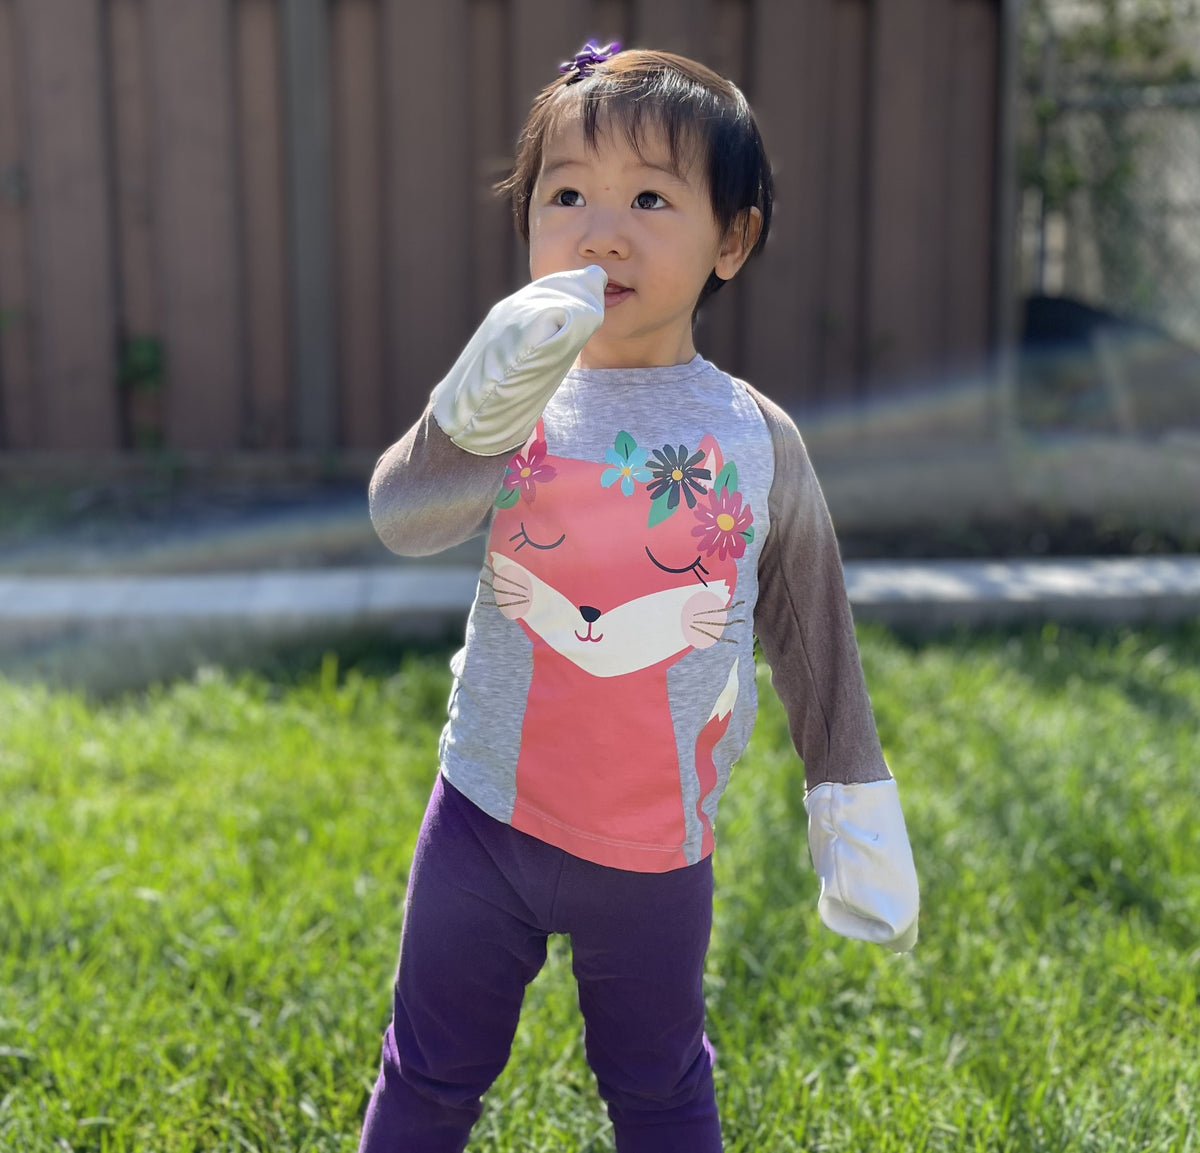 Featured Product Designed for Babies with Eczema  The BEST scratch mitts on the market that stays on!  Specifically designed for kids with eczema who scratch or rub themselves due to skin irritation, the bamboo sleeve and silk outer layer is super-soft an